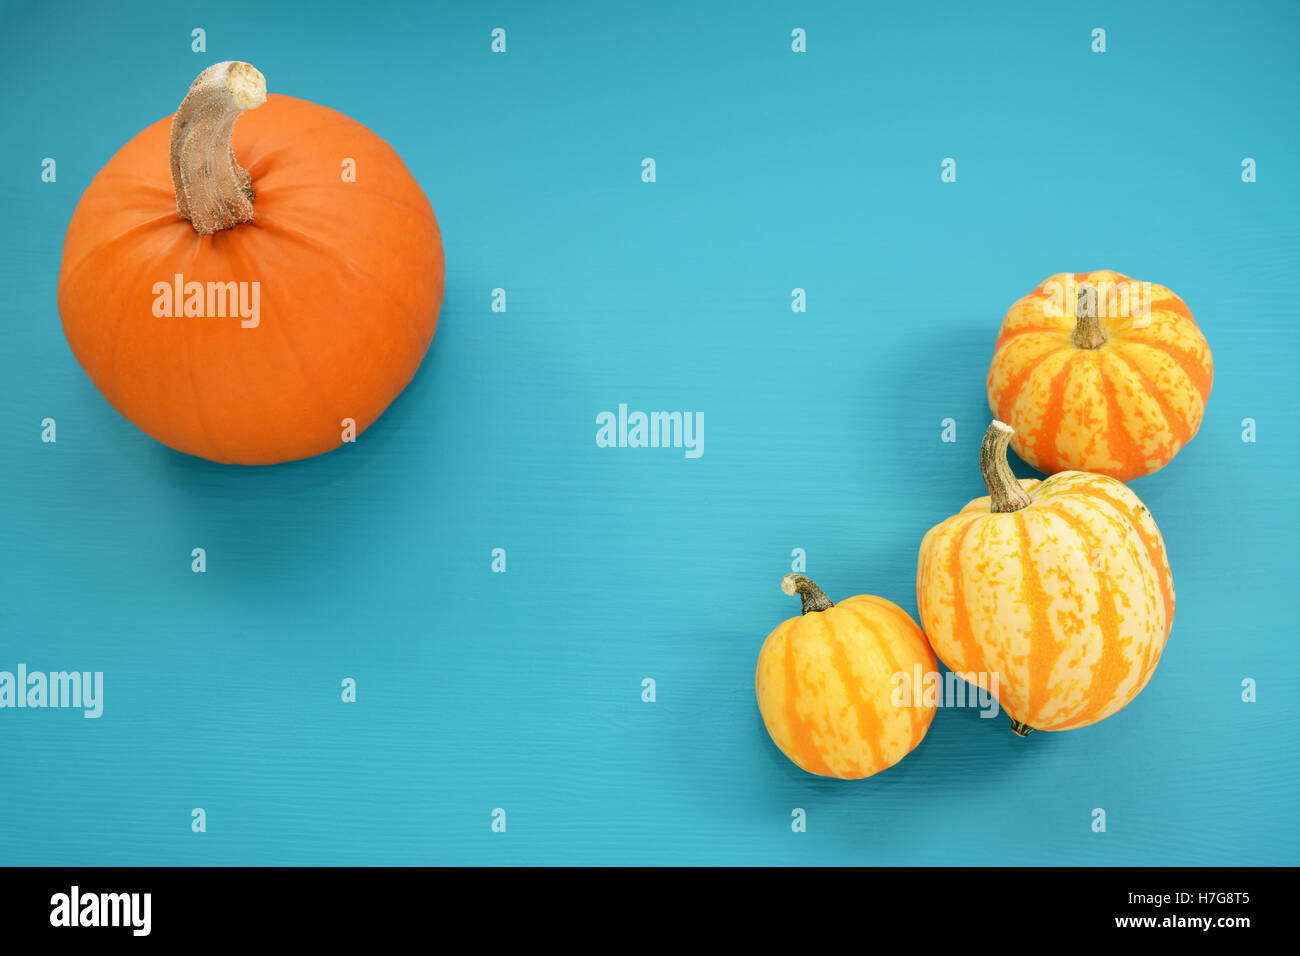 Orange pumpkin and yellow Festival squash on bold teal painted wood background with copy space Stock Photo